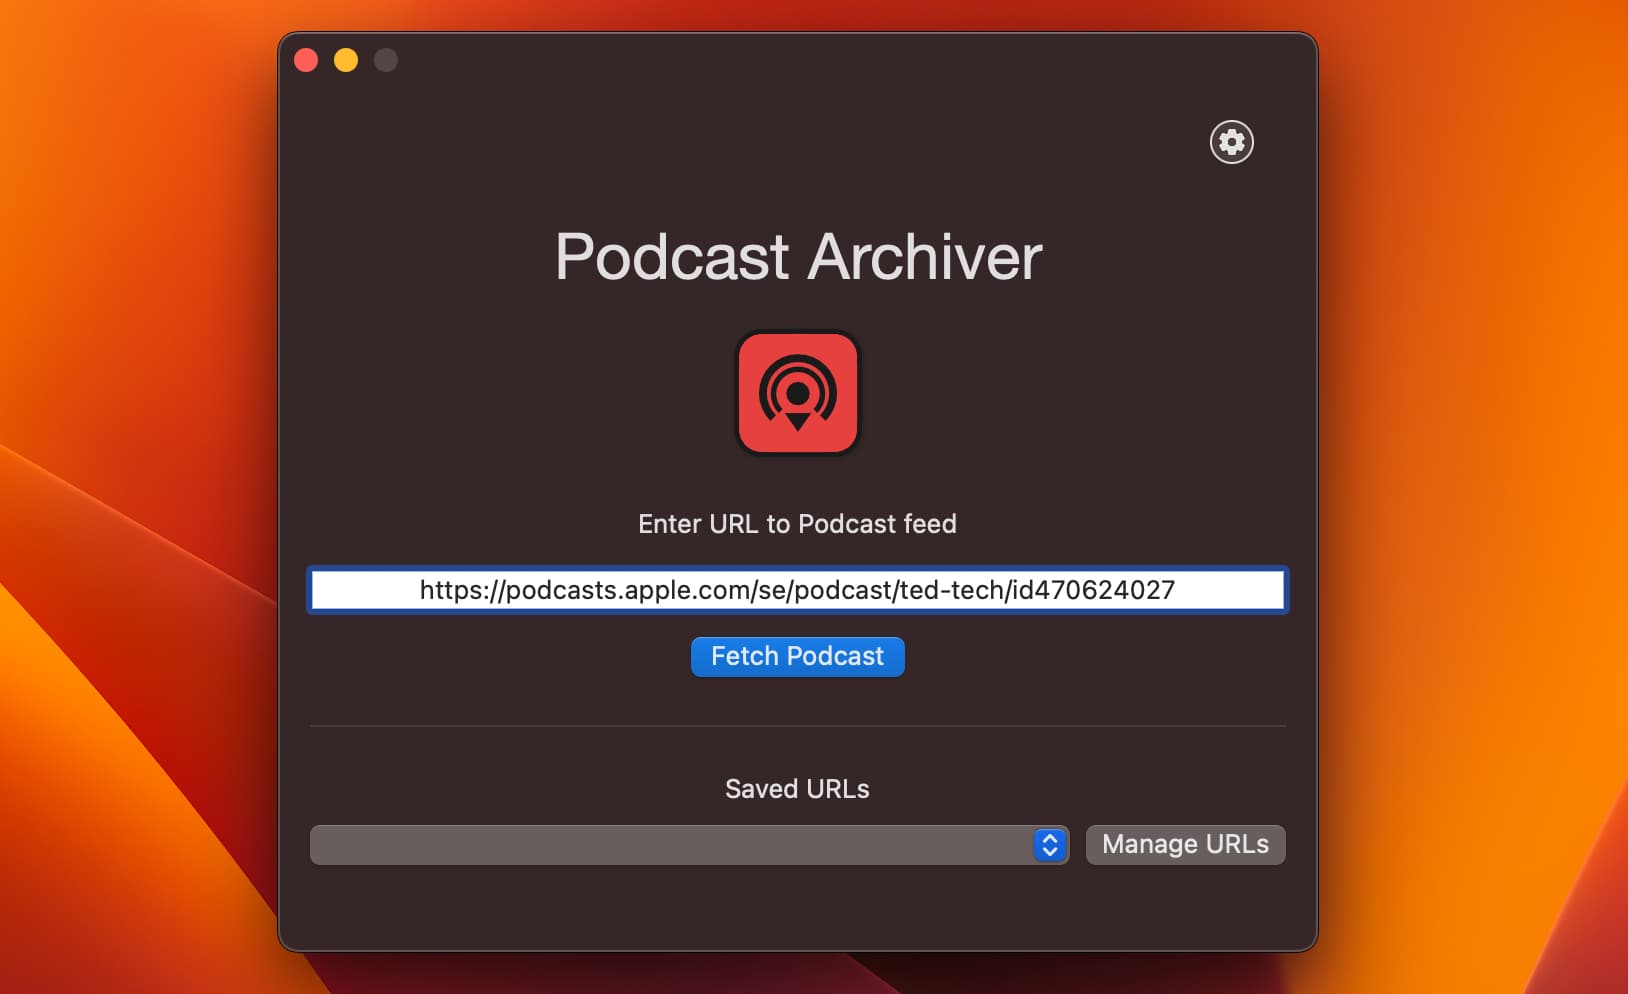 Paste podcast link into Podcast Archiver